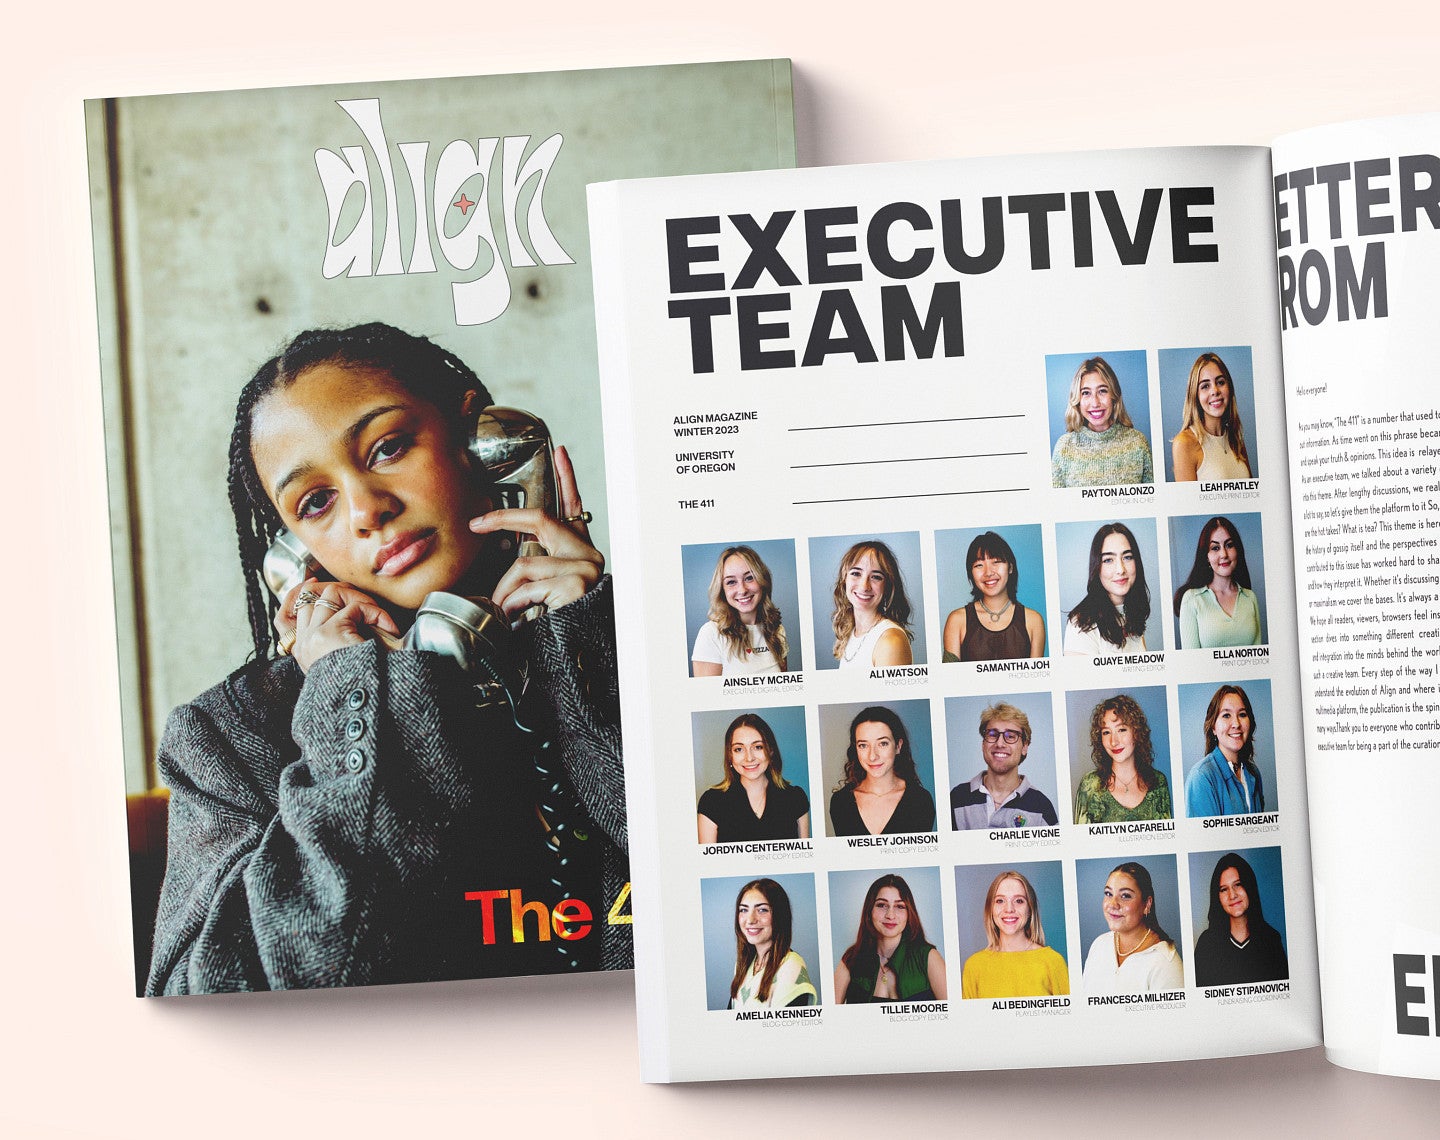  view of align magazine cover and spread showing executive team